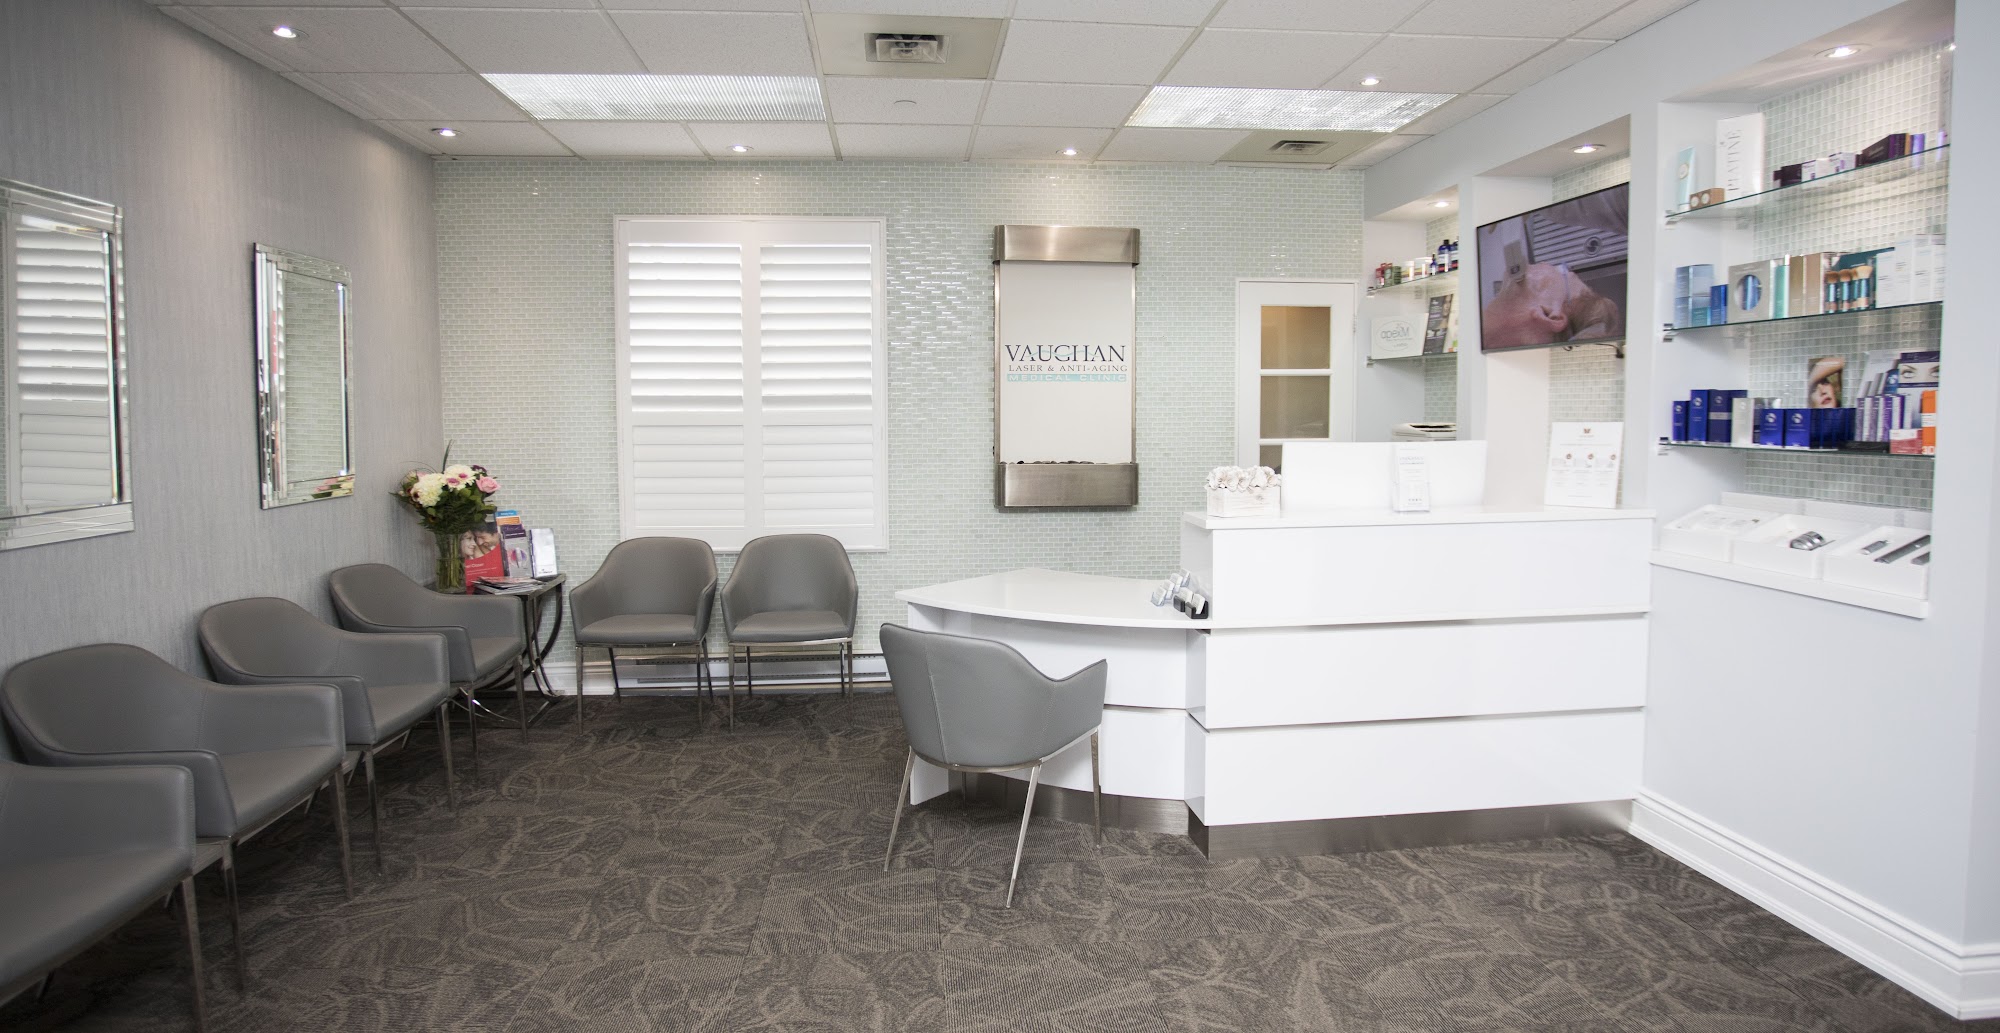 Vaughan Laser & Anti-Aging Medical Clinic